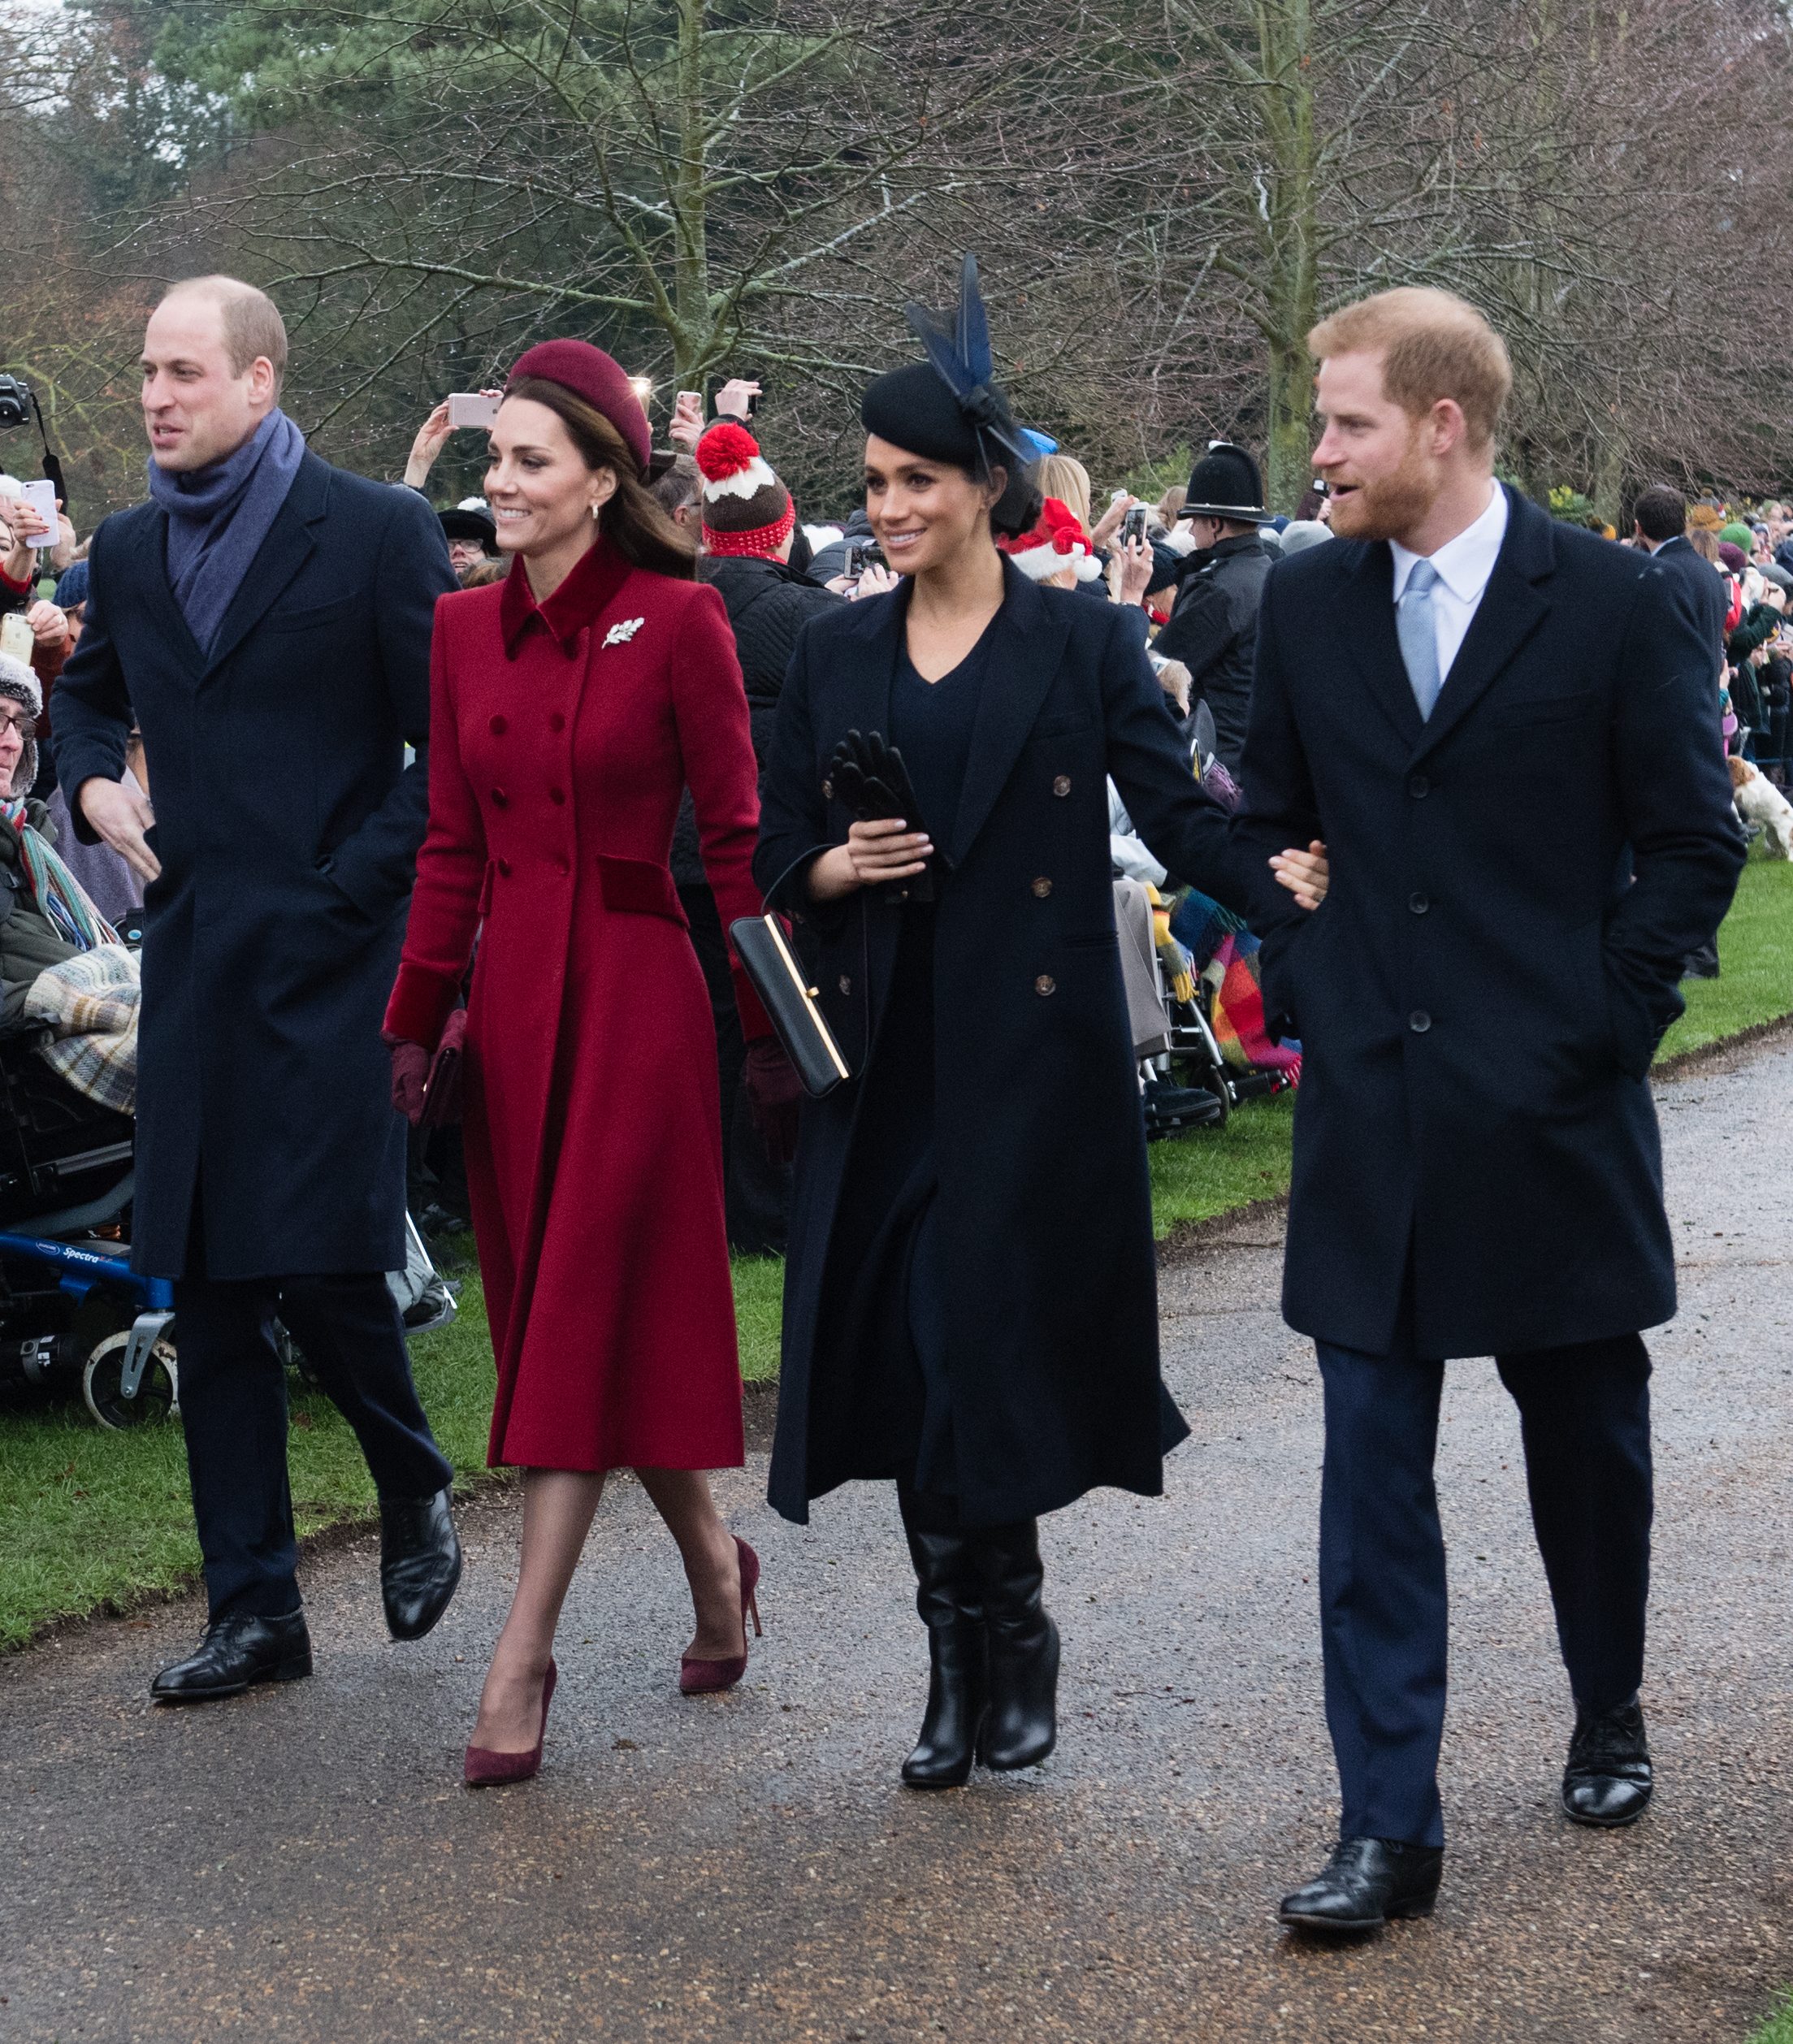 KING'S LYNN, ENGLAND - DECEMBER 25: Prince William, Duke of Cambridge, Catherine, Duchess of Cambridge, Meghan, Duchess of Sussex and Prince Harry, Duke of Sussex attend Christmas Day Church service at Church of St Mary Magdalene on the Sandringham estate on December 25, 2018 in King's Lynn, England. (Photo by Samir Hussein/WireImage)